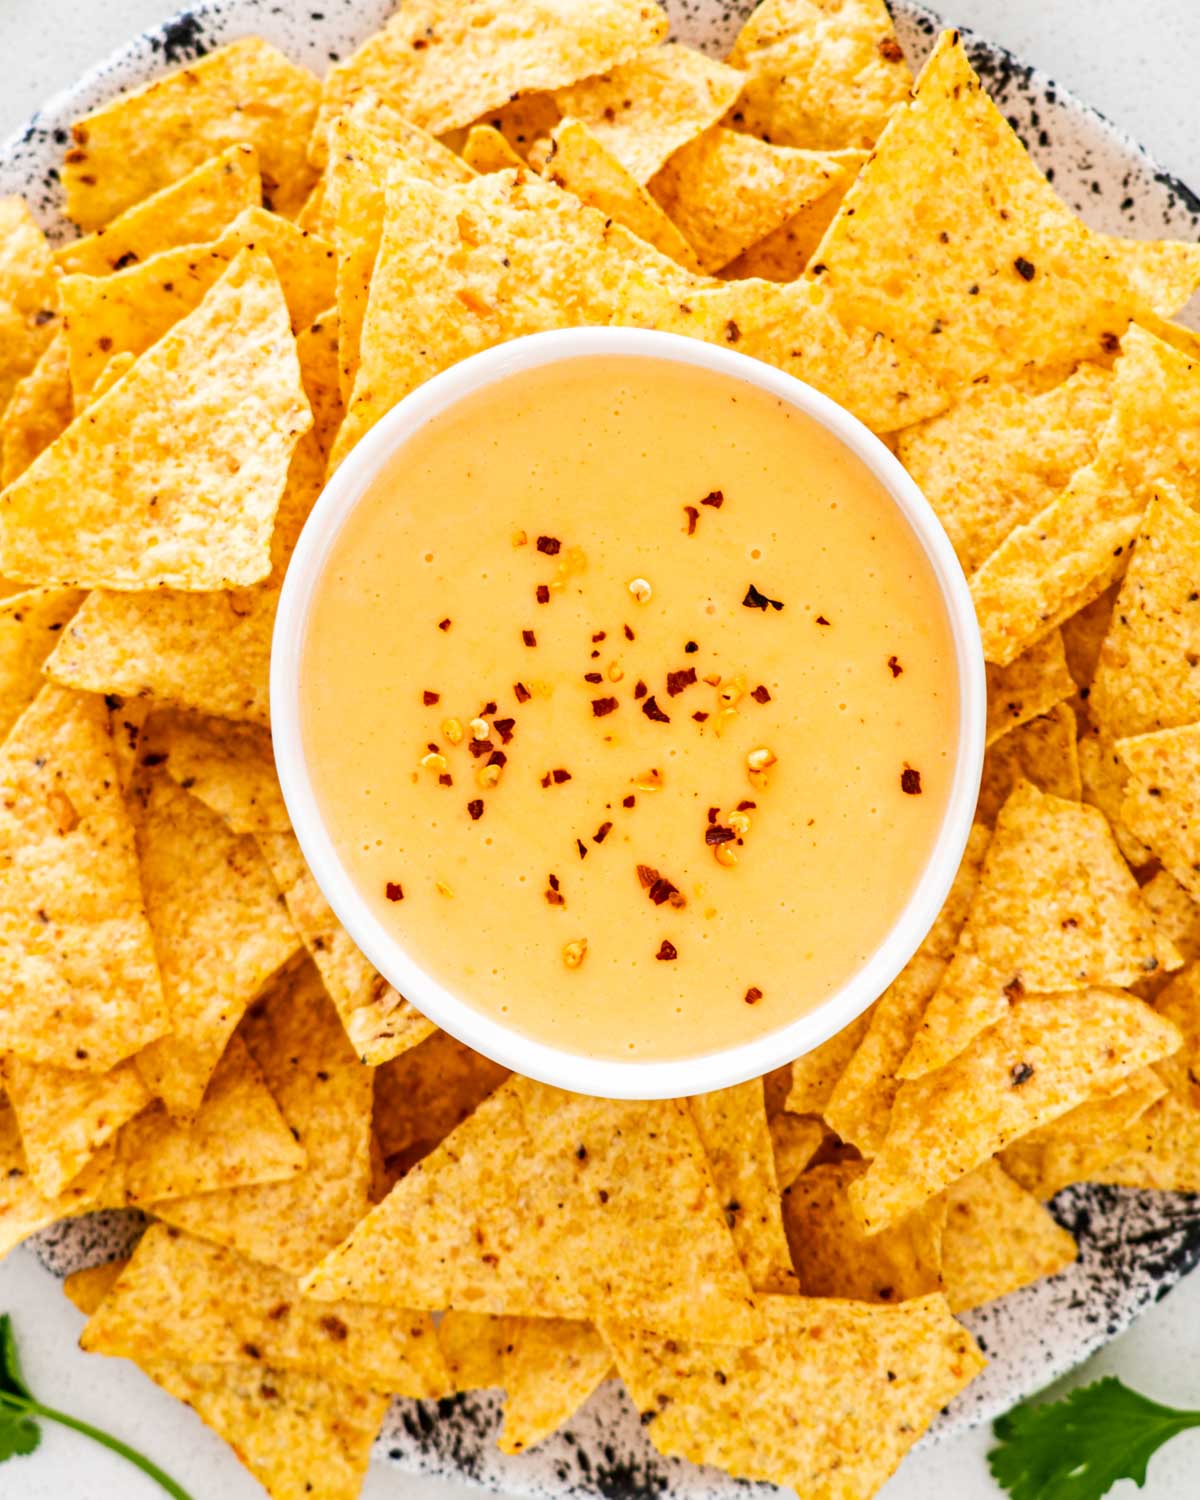 a plate full of tortilla chips with a bowl of nacho cheese sauce in the middle.